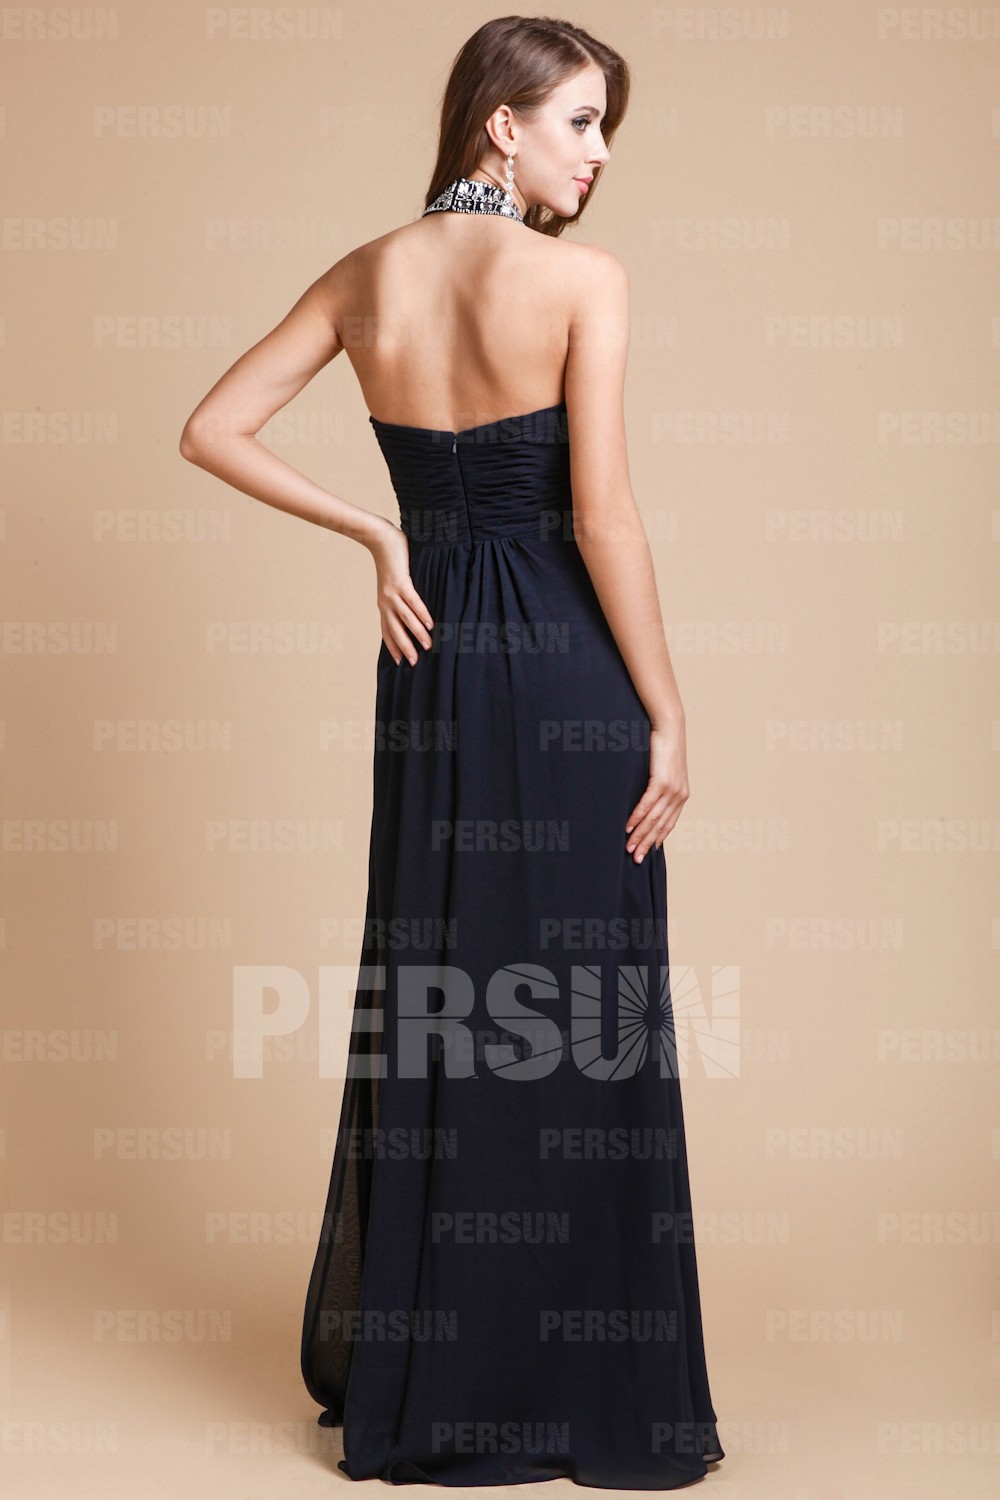 Beaded Ruched Halter Floor Length A Line Chiffon Prom Dress